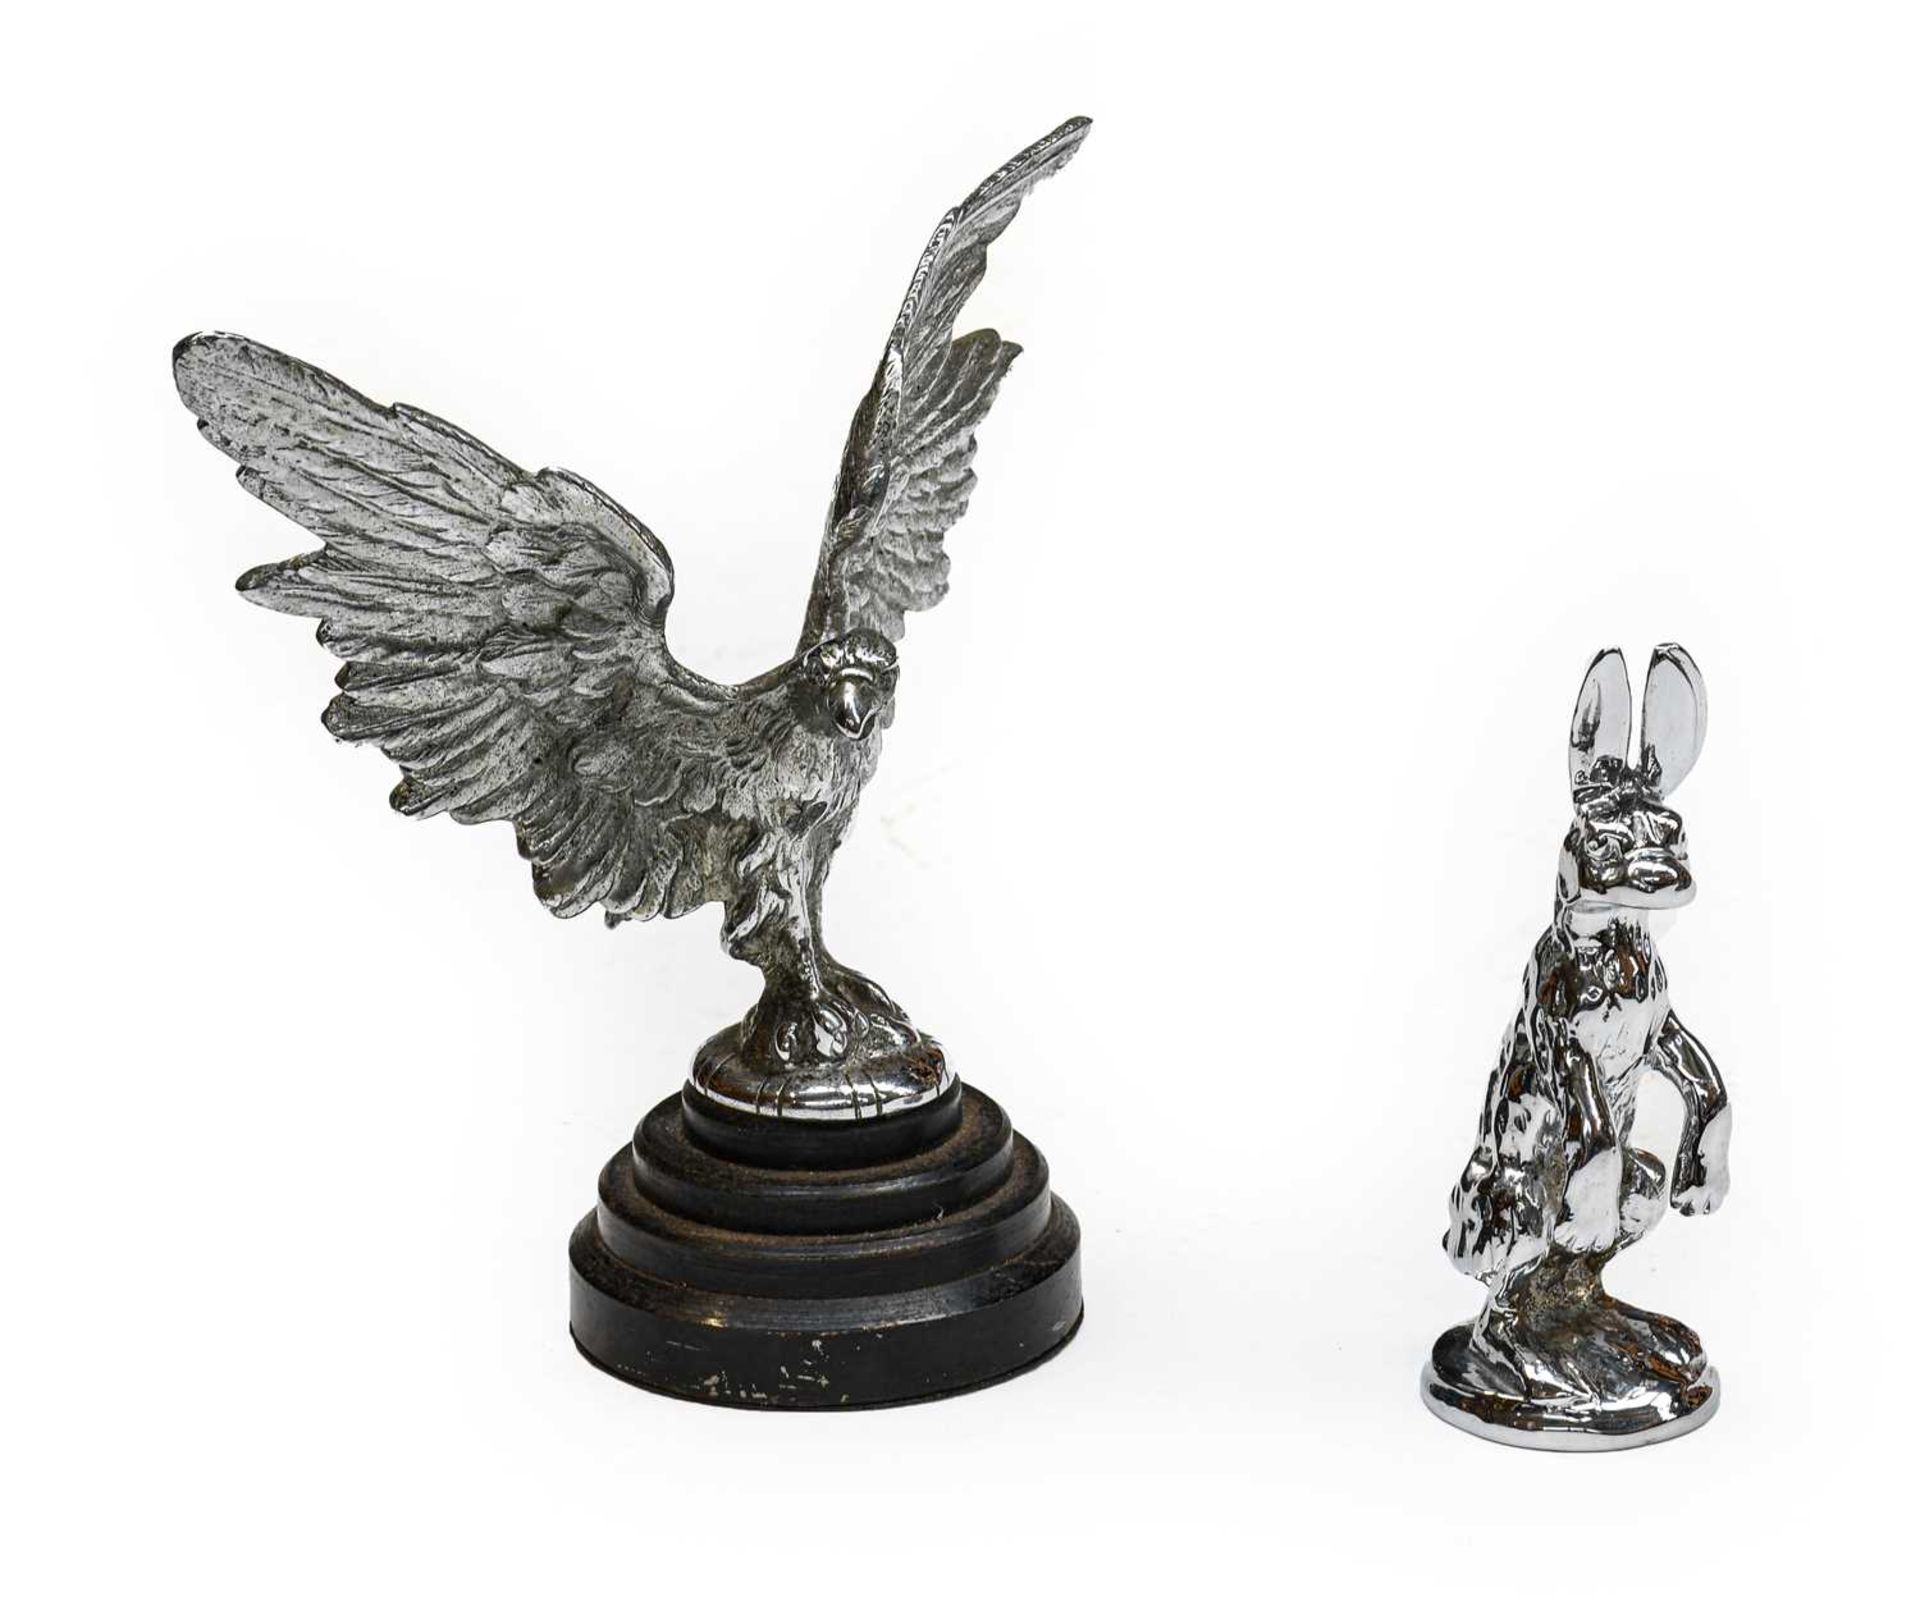 A Chrome on Brass Hare Car Mascot, probably from an Alvis, 12cm high; and A Chrome Plated Eagle